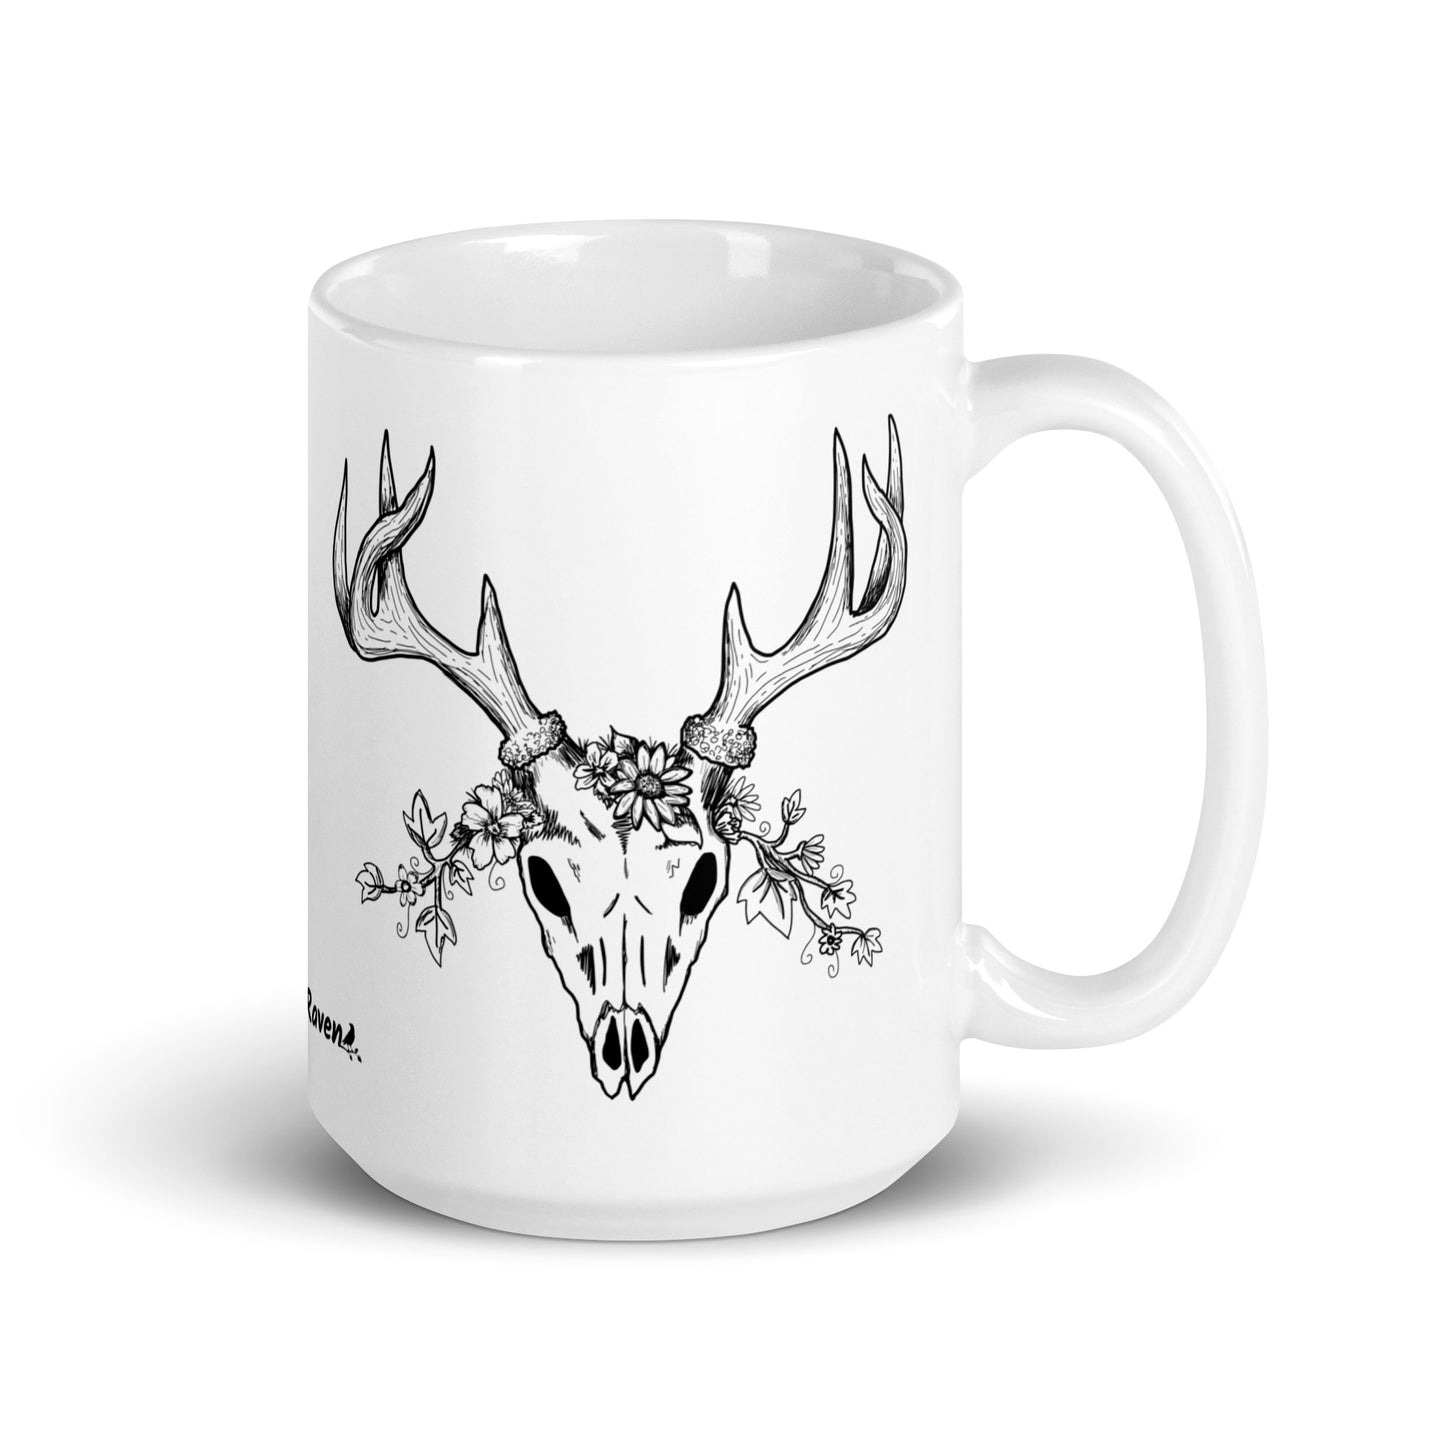 15 oz white ceramic mug. Features a double-sided hand illustrated image of a deer skull wreathed in flowers.